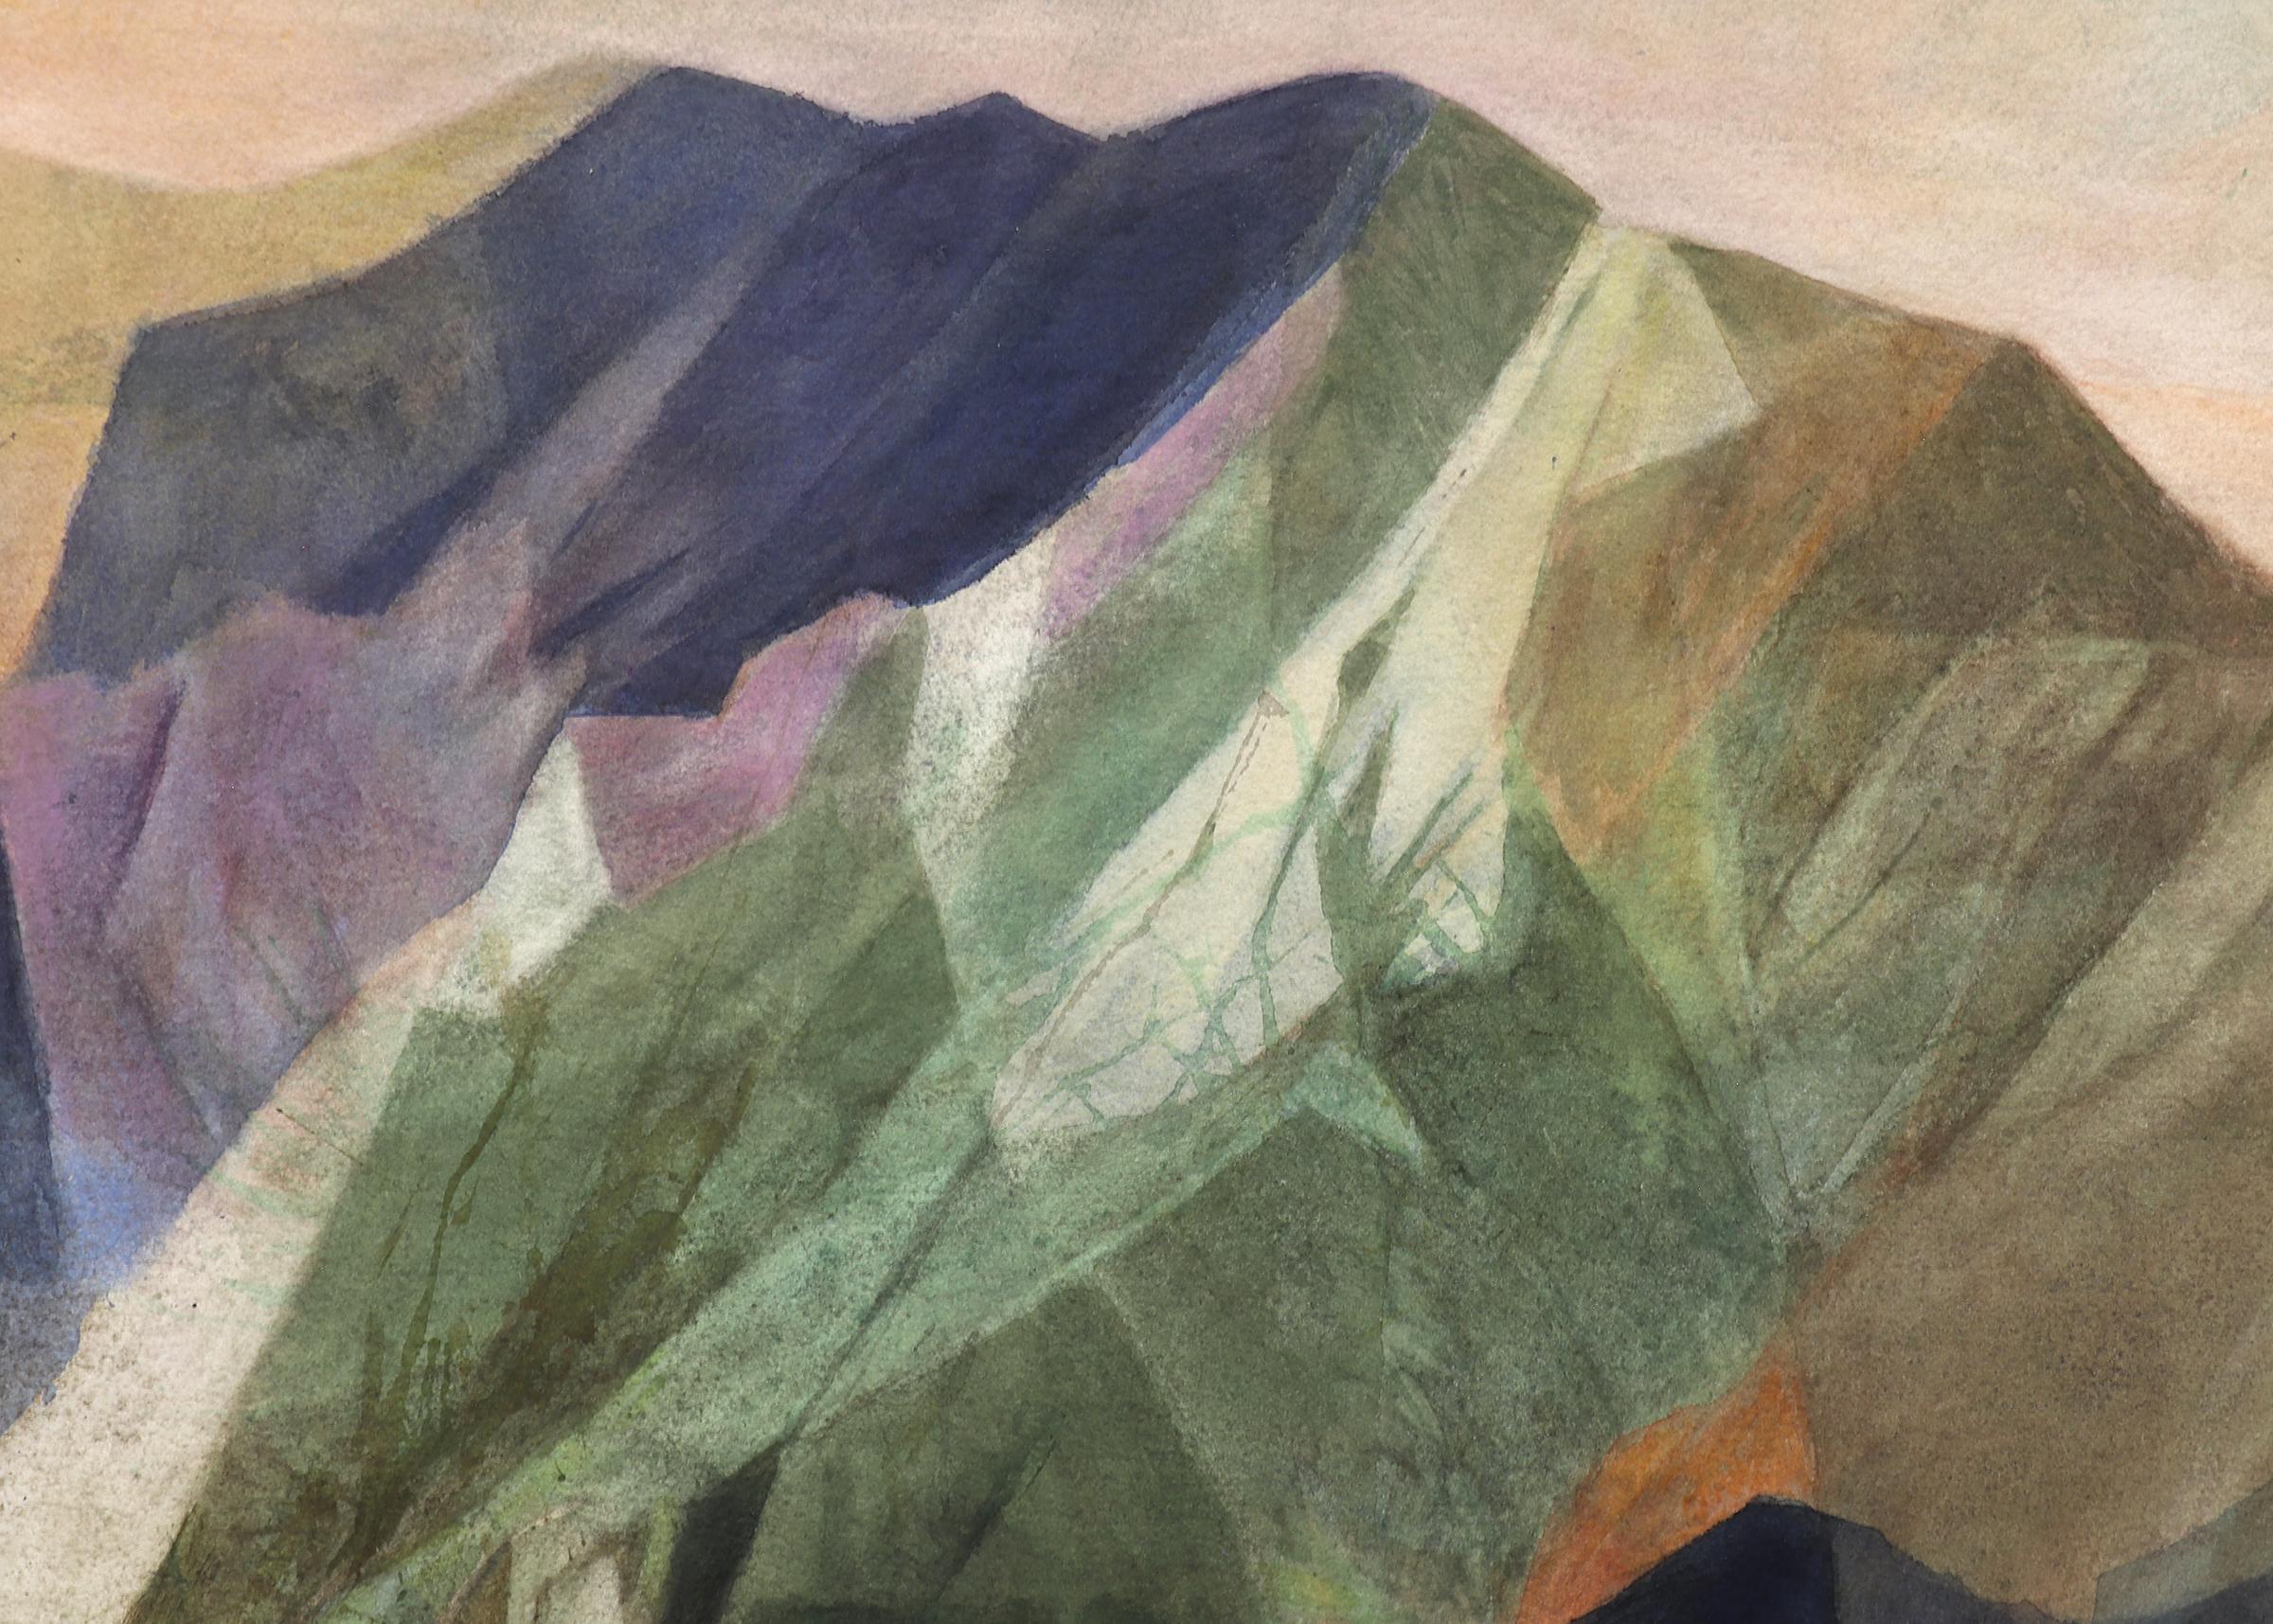 Abstracted mountain landscape, watercolor on paper by Ethel Magafan titled 